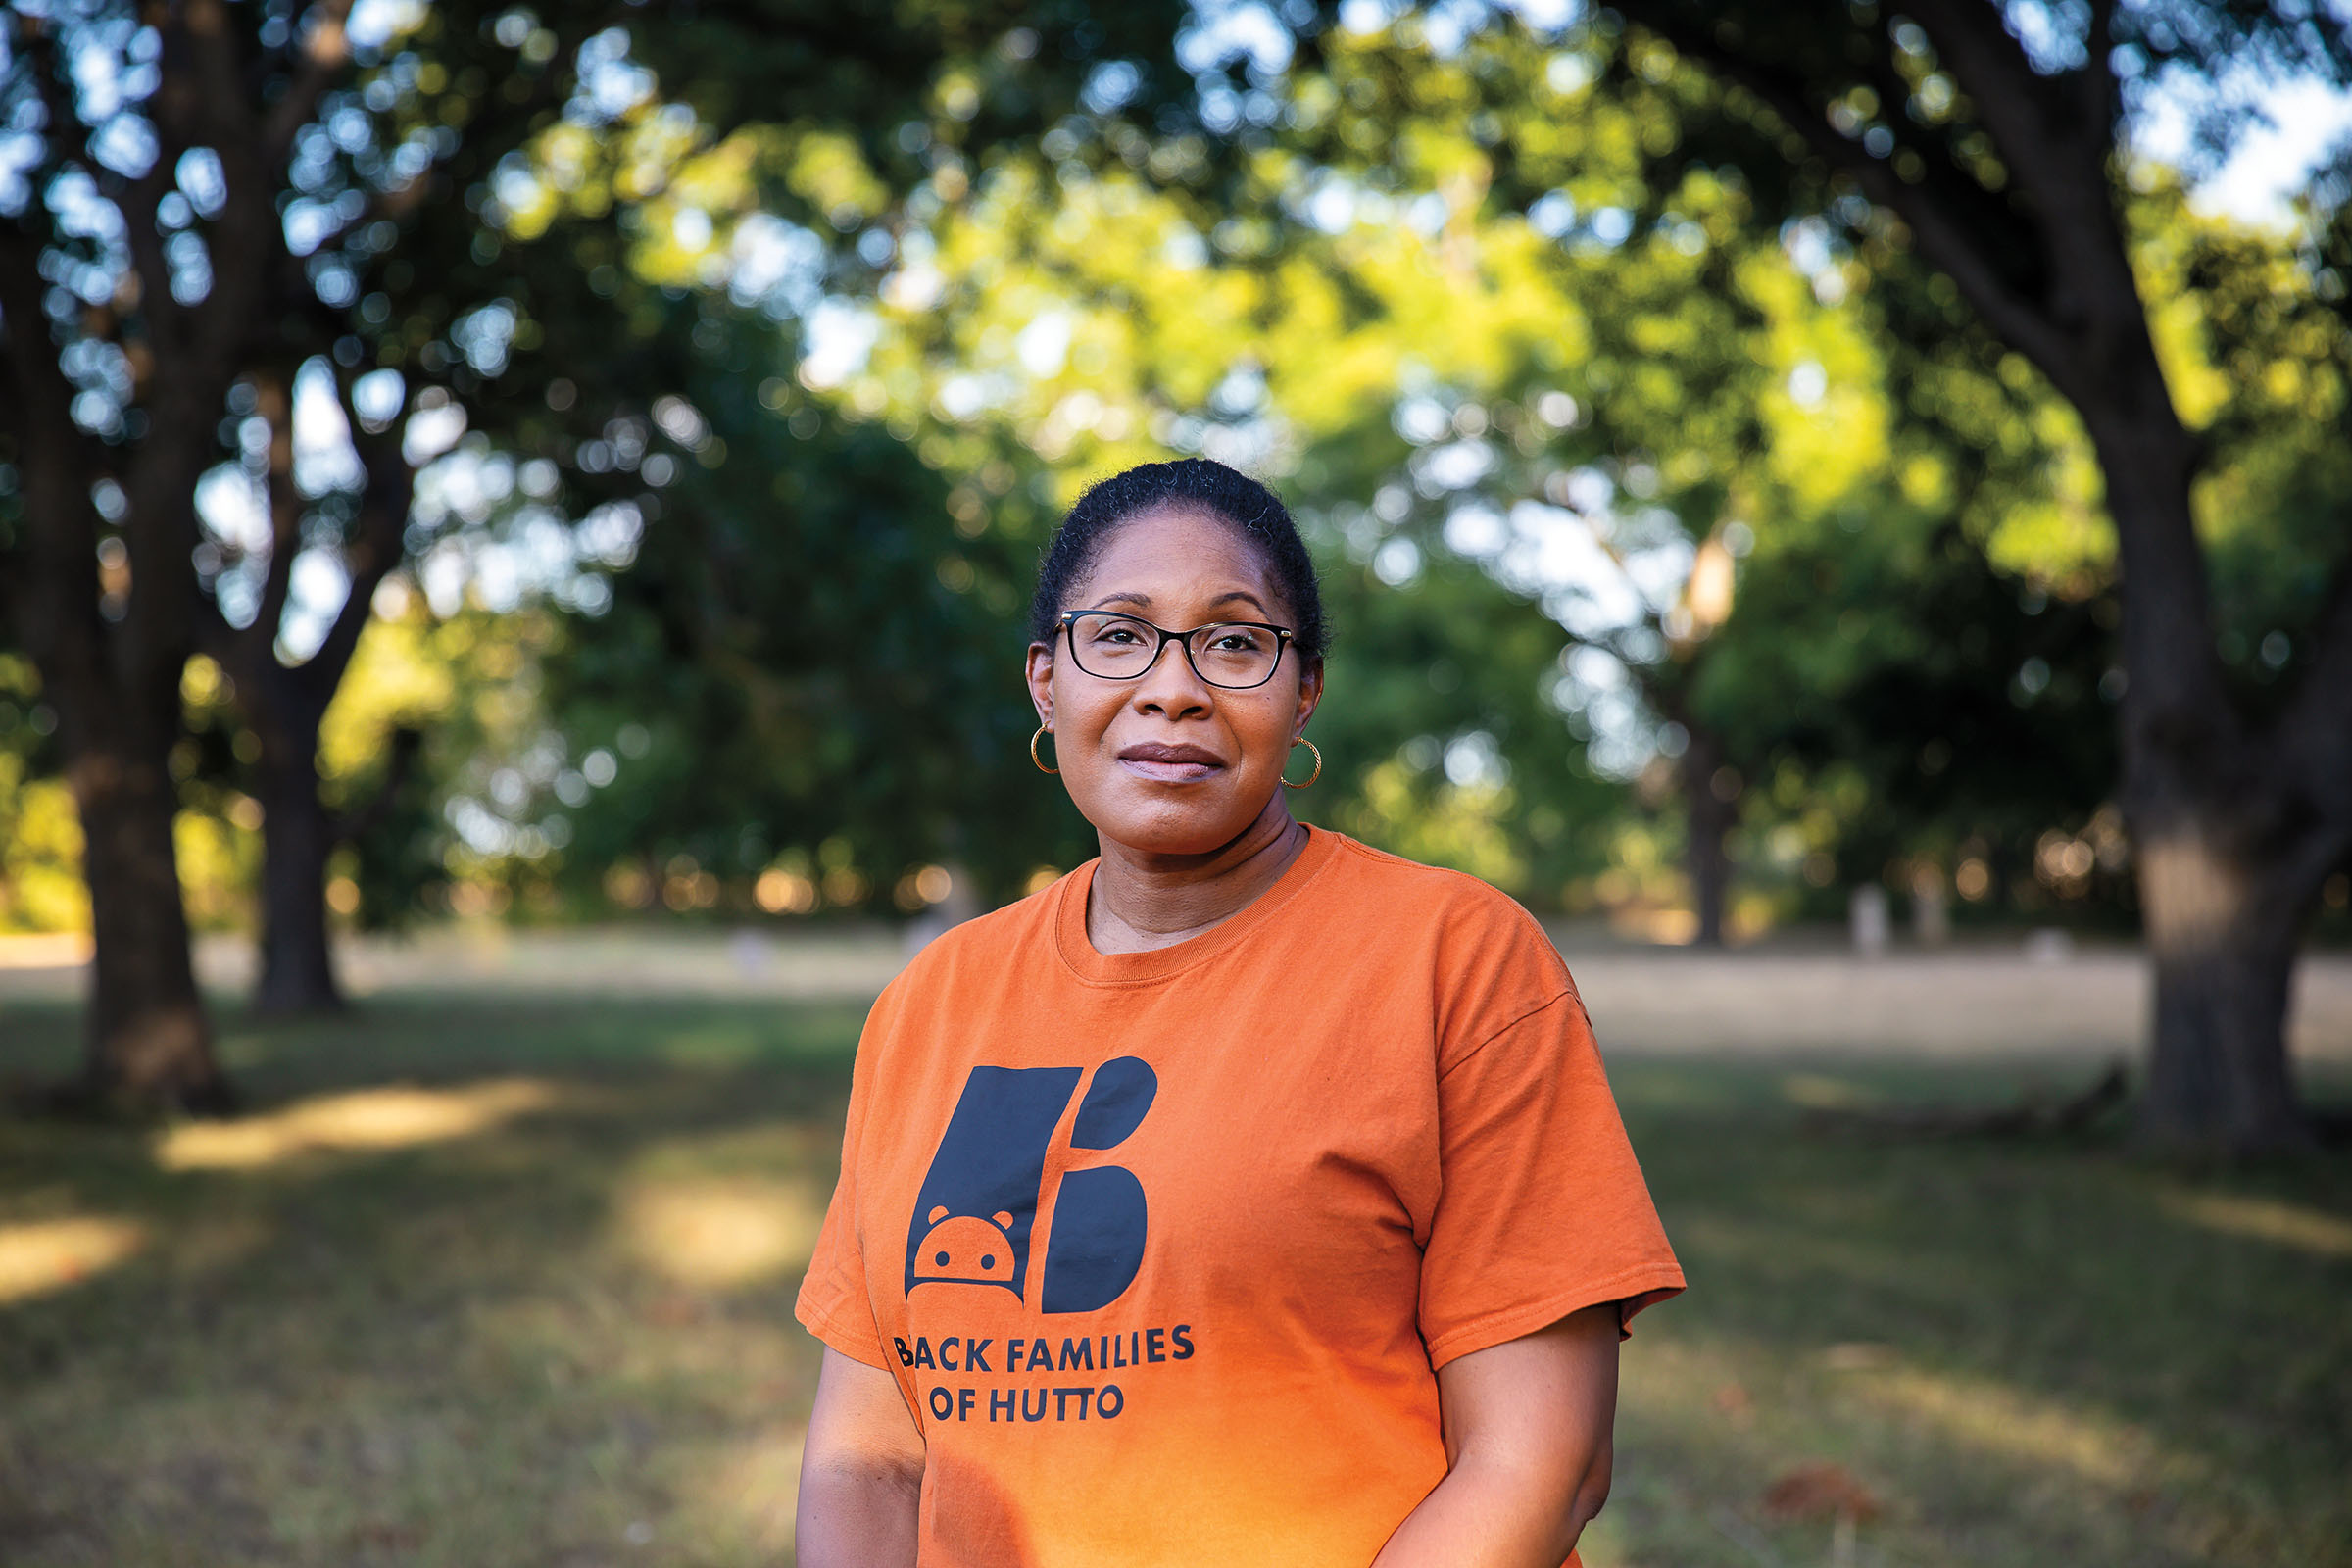 A woman in an orange shirt stands in front of a canopy of green trees